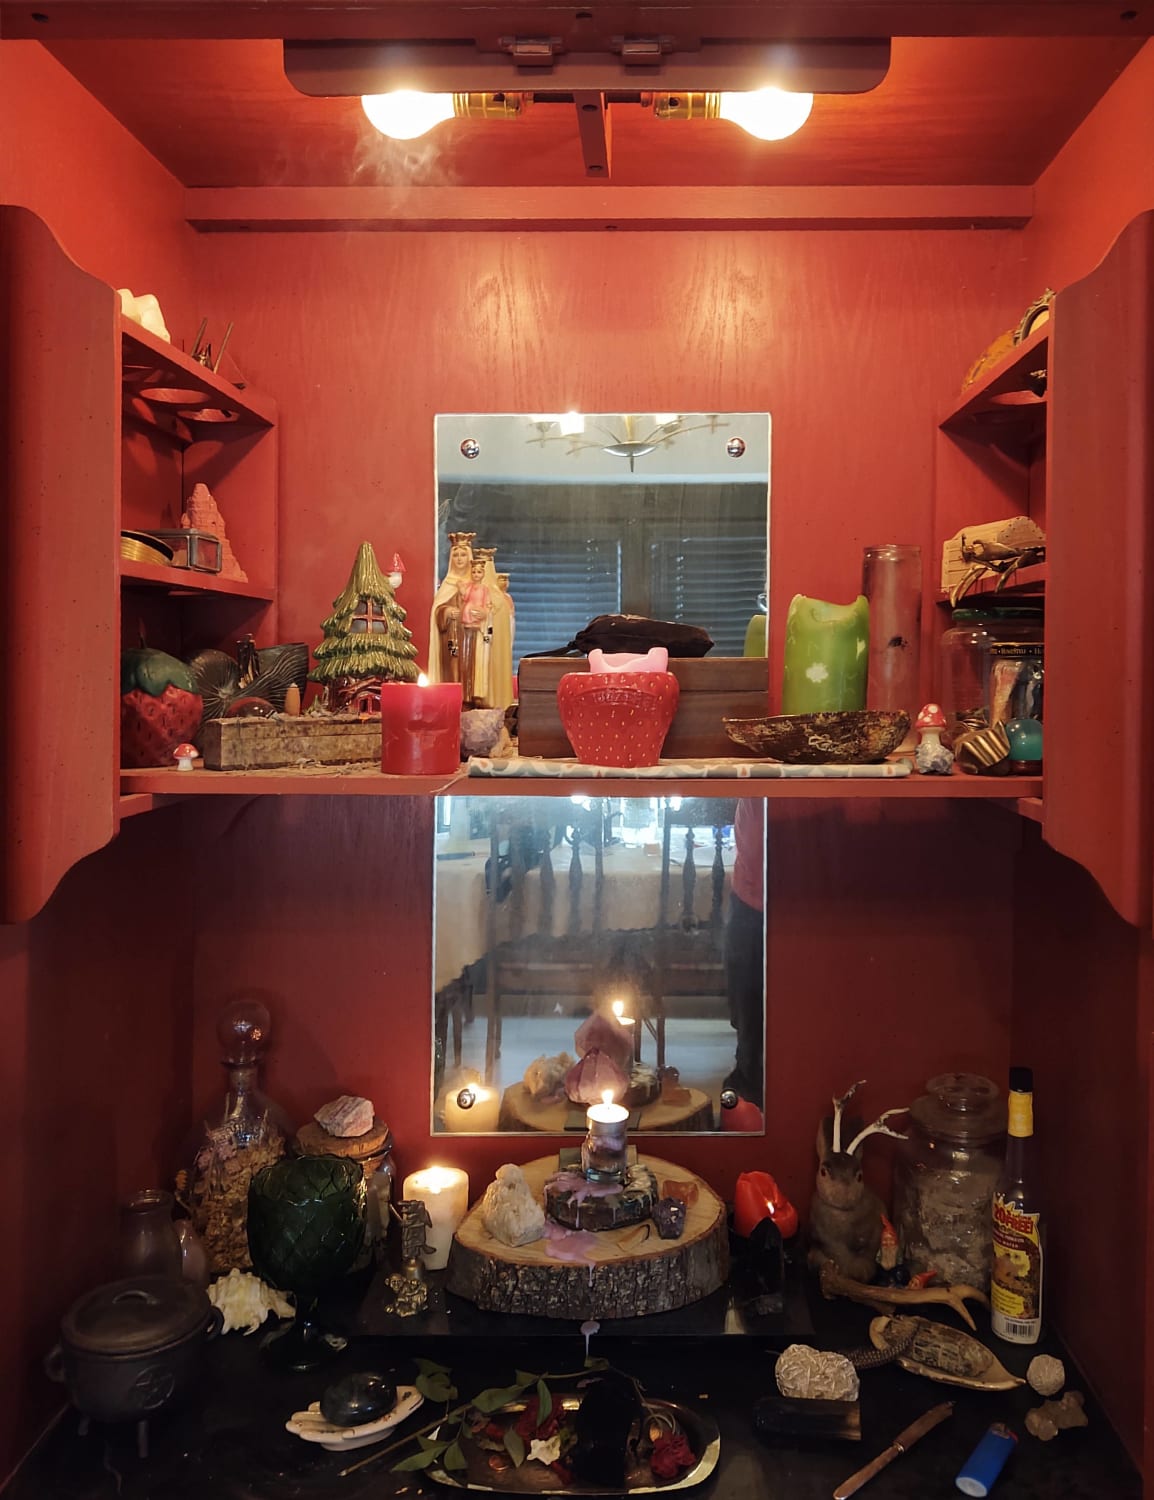 Our altar all lit up for the Lunar Eclipse